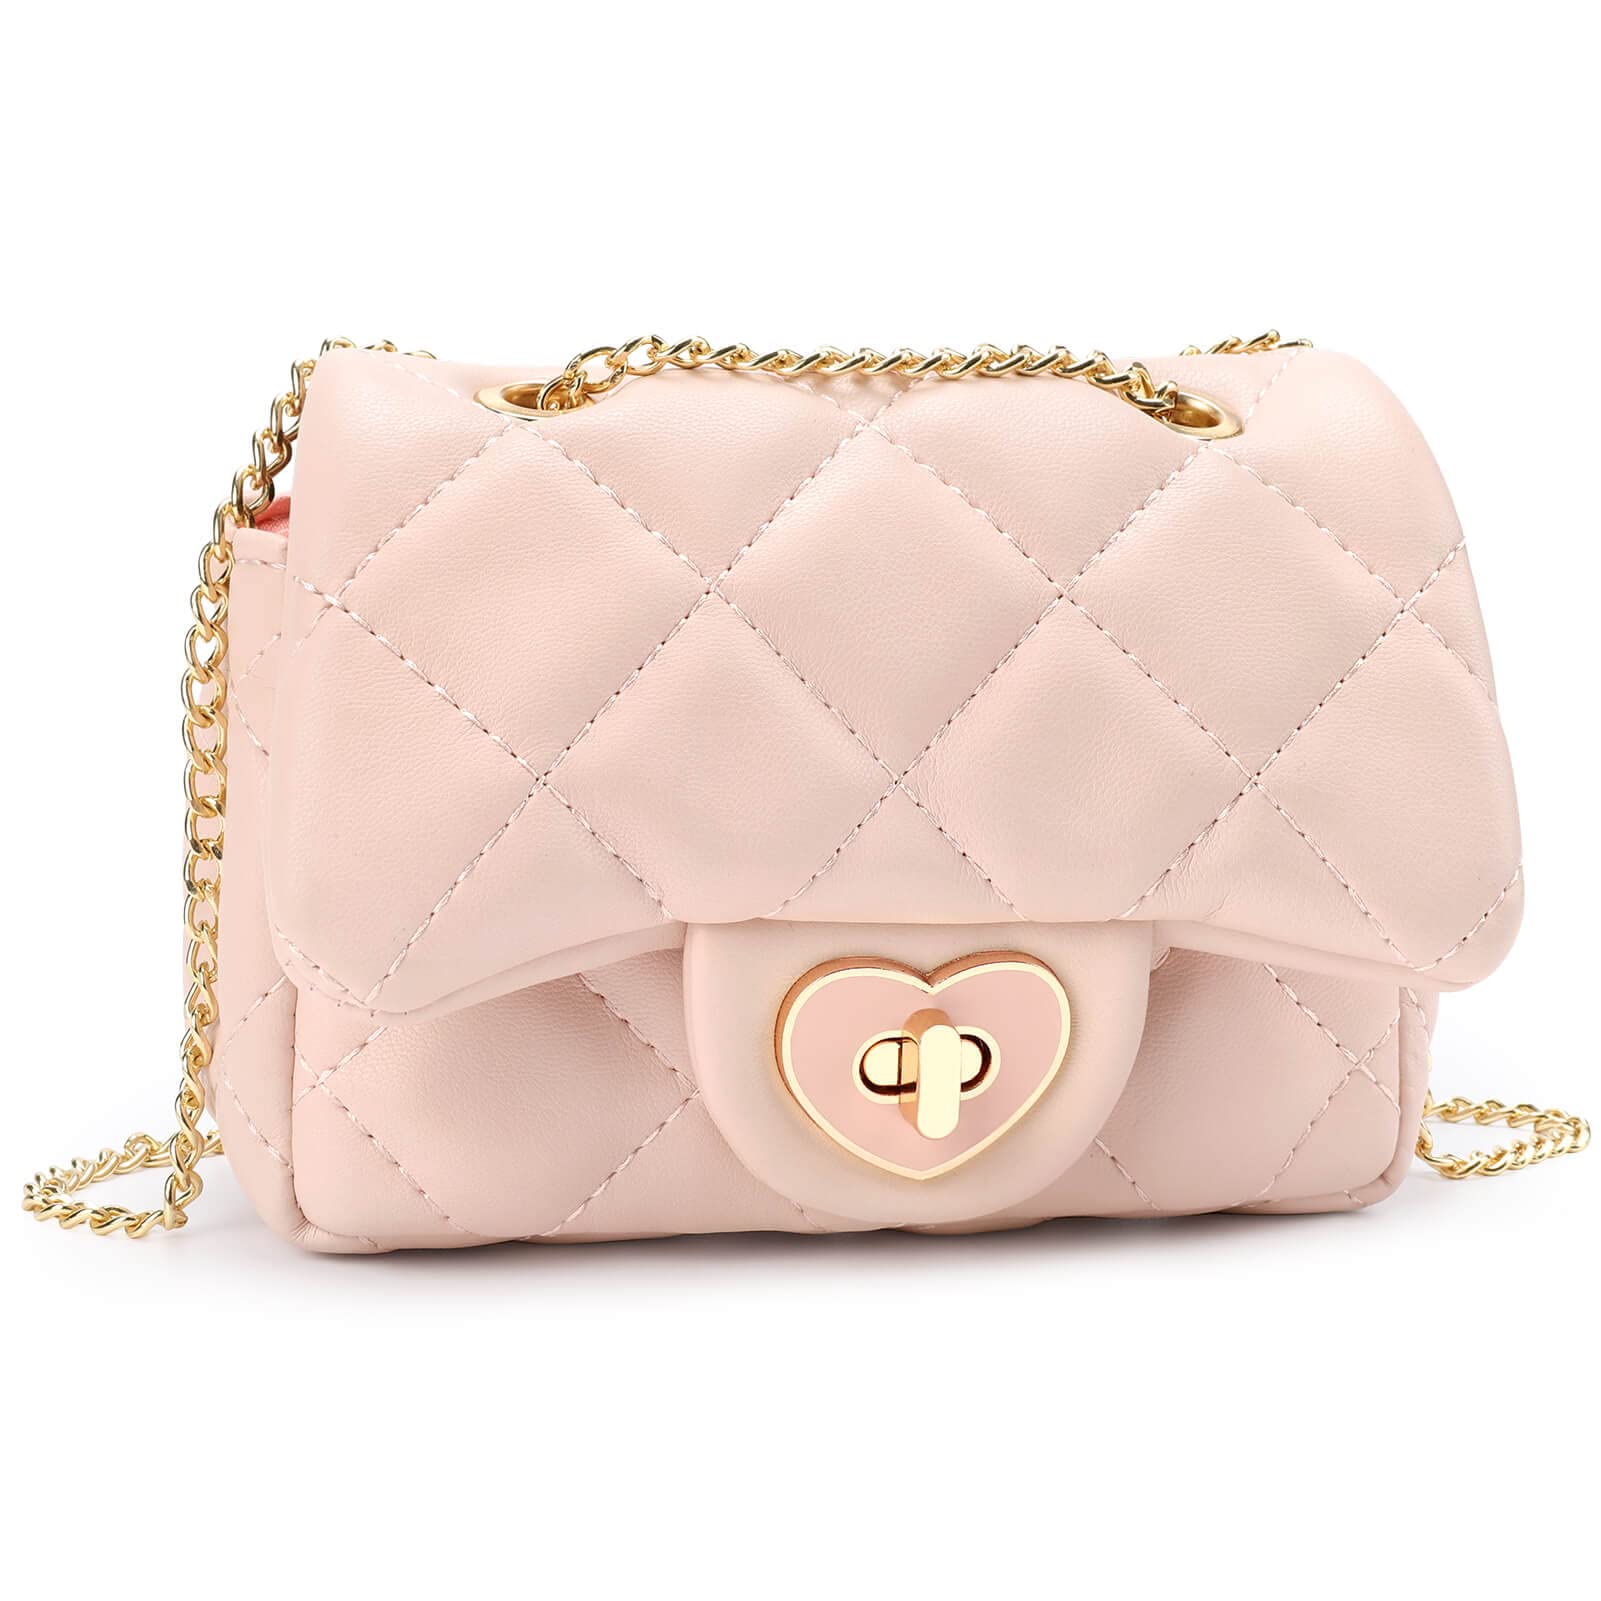 Girls Kids Children Mini Purses and Shell Handbags Leather Crossbody Bags  for Women Small Wallet Party Hand bag Girl Purse